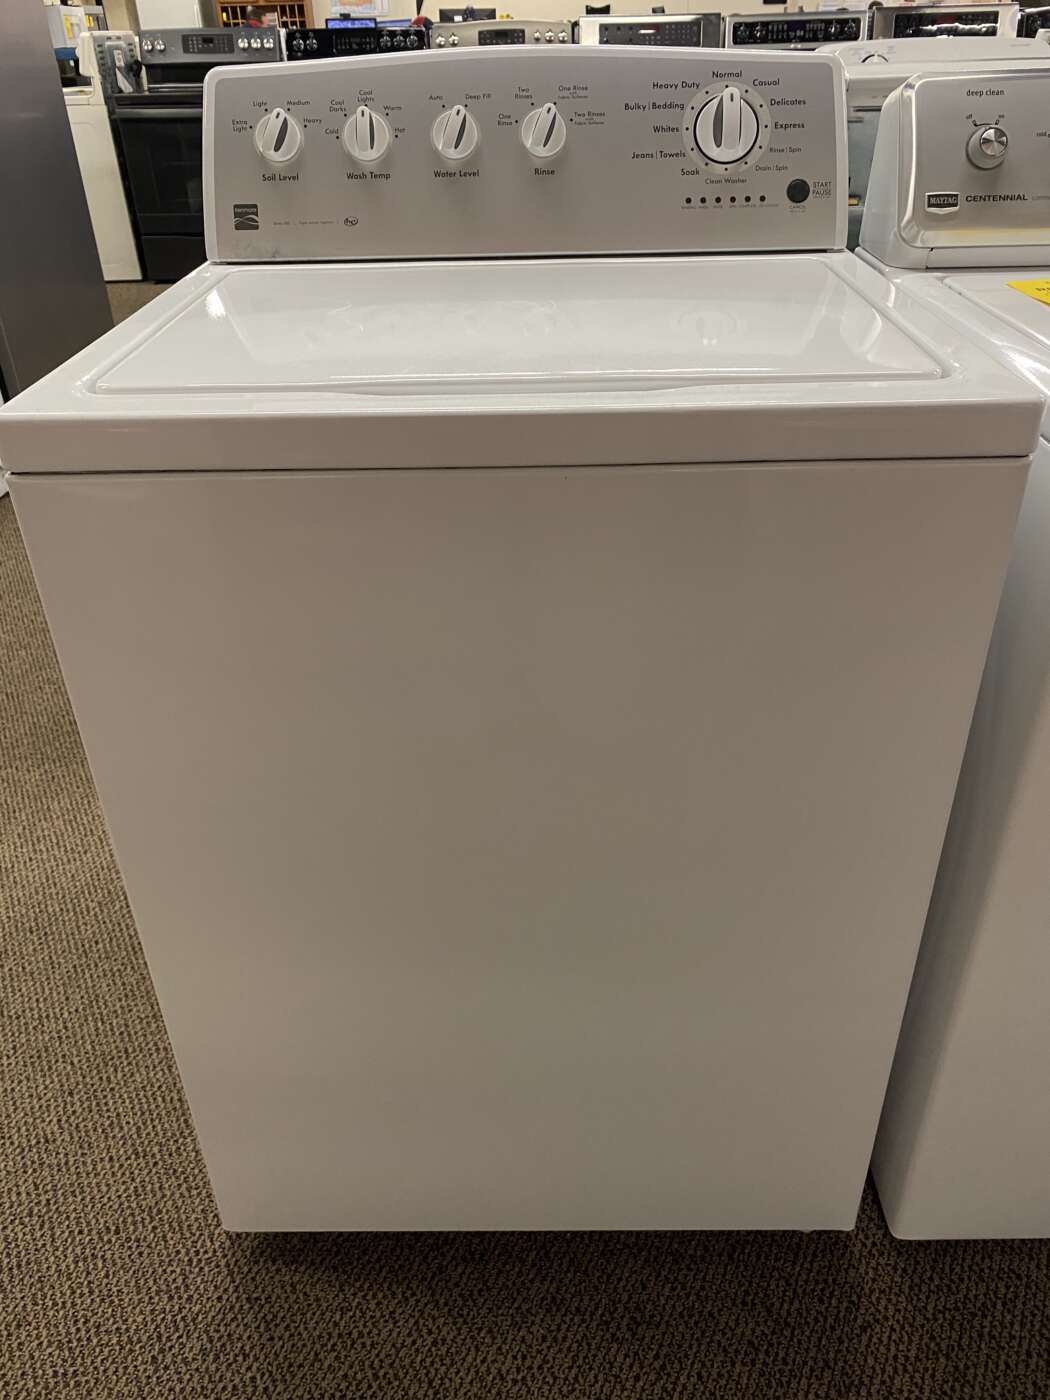 Reconditioned KENMORE 3.8 Cu. Ft. Top-Load H/E Washer – White